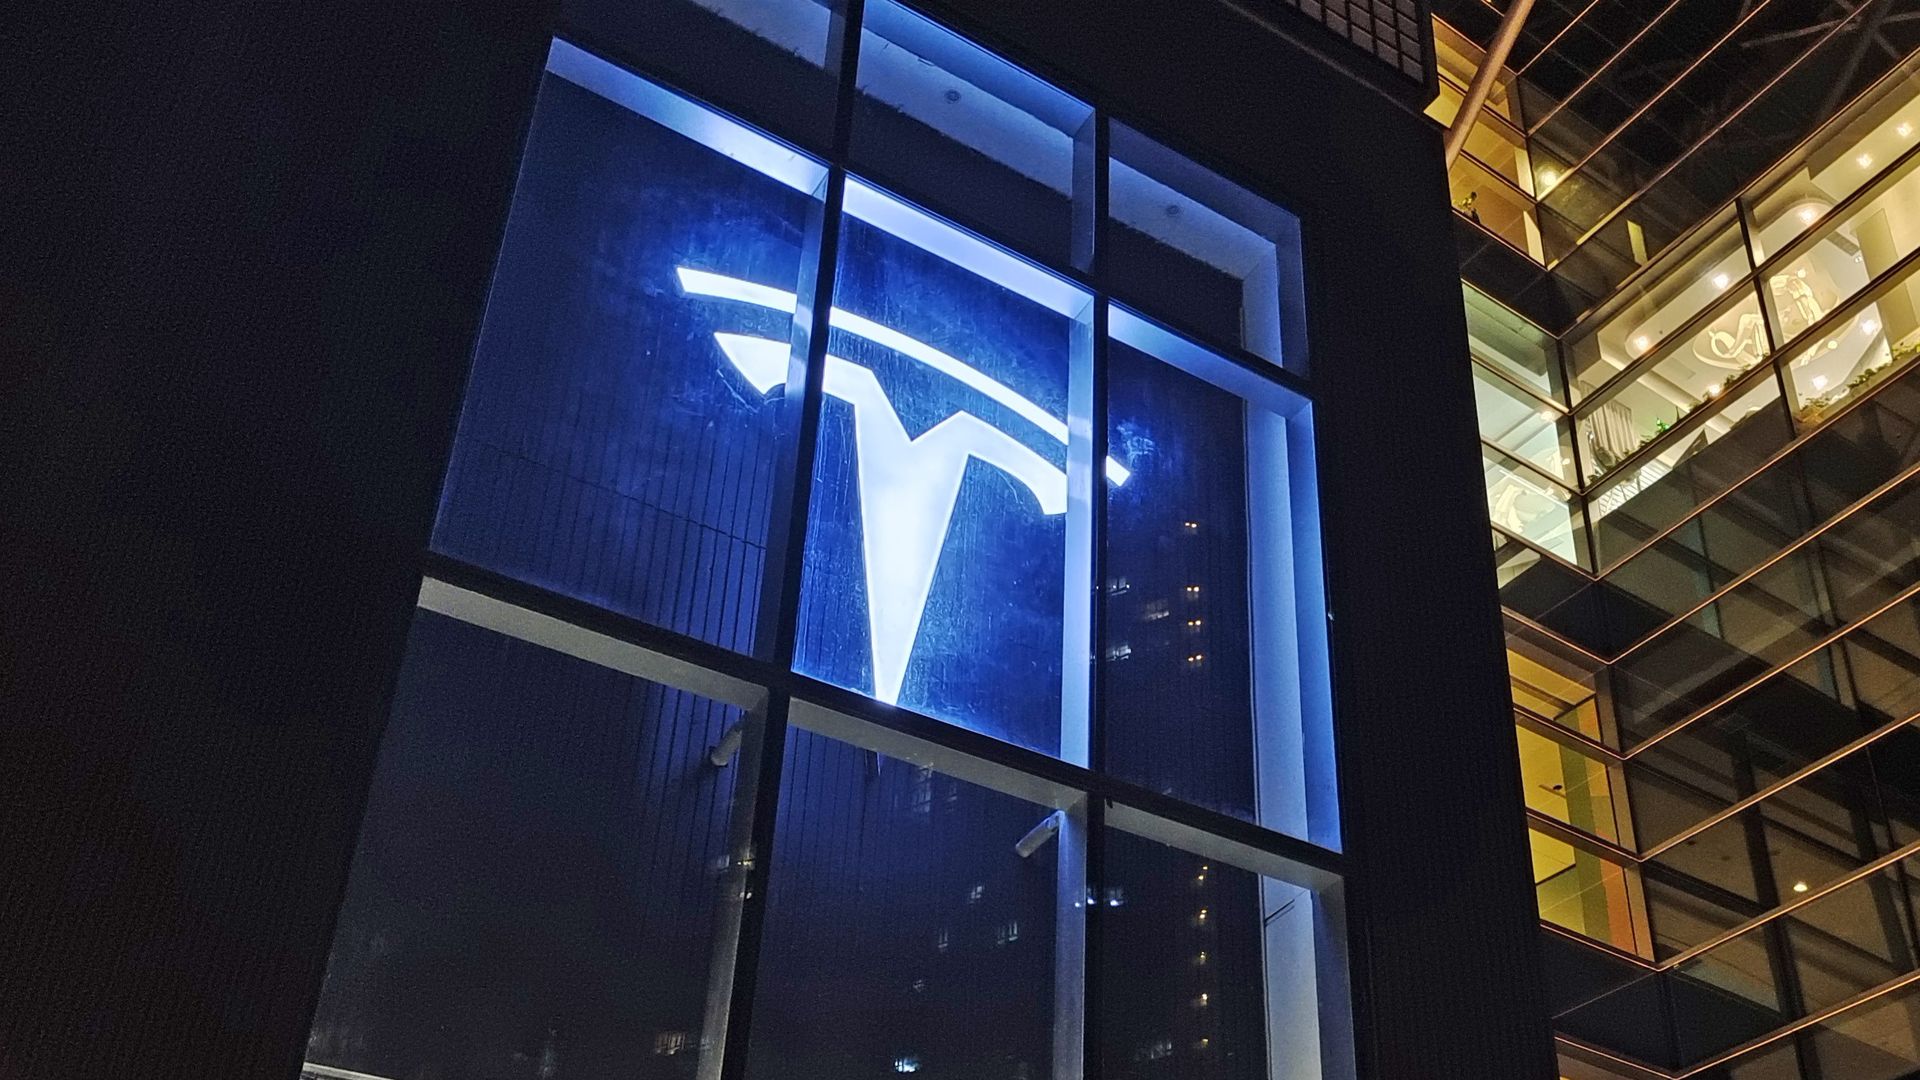 The Tesla logo glows blue in the window of a showroom in Shanghai at night.